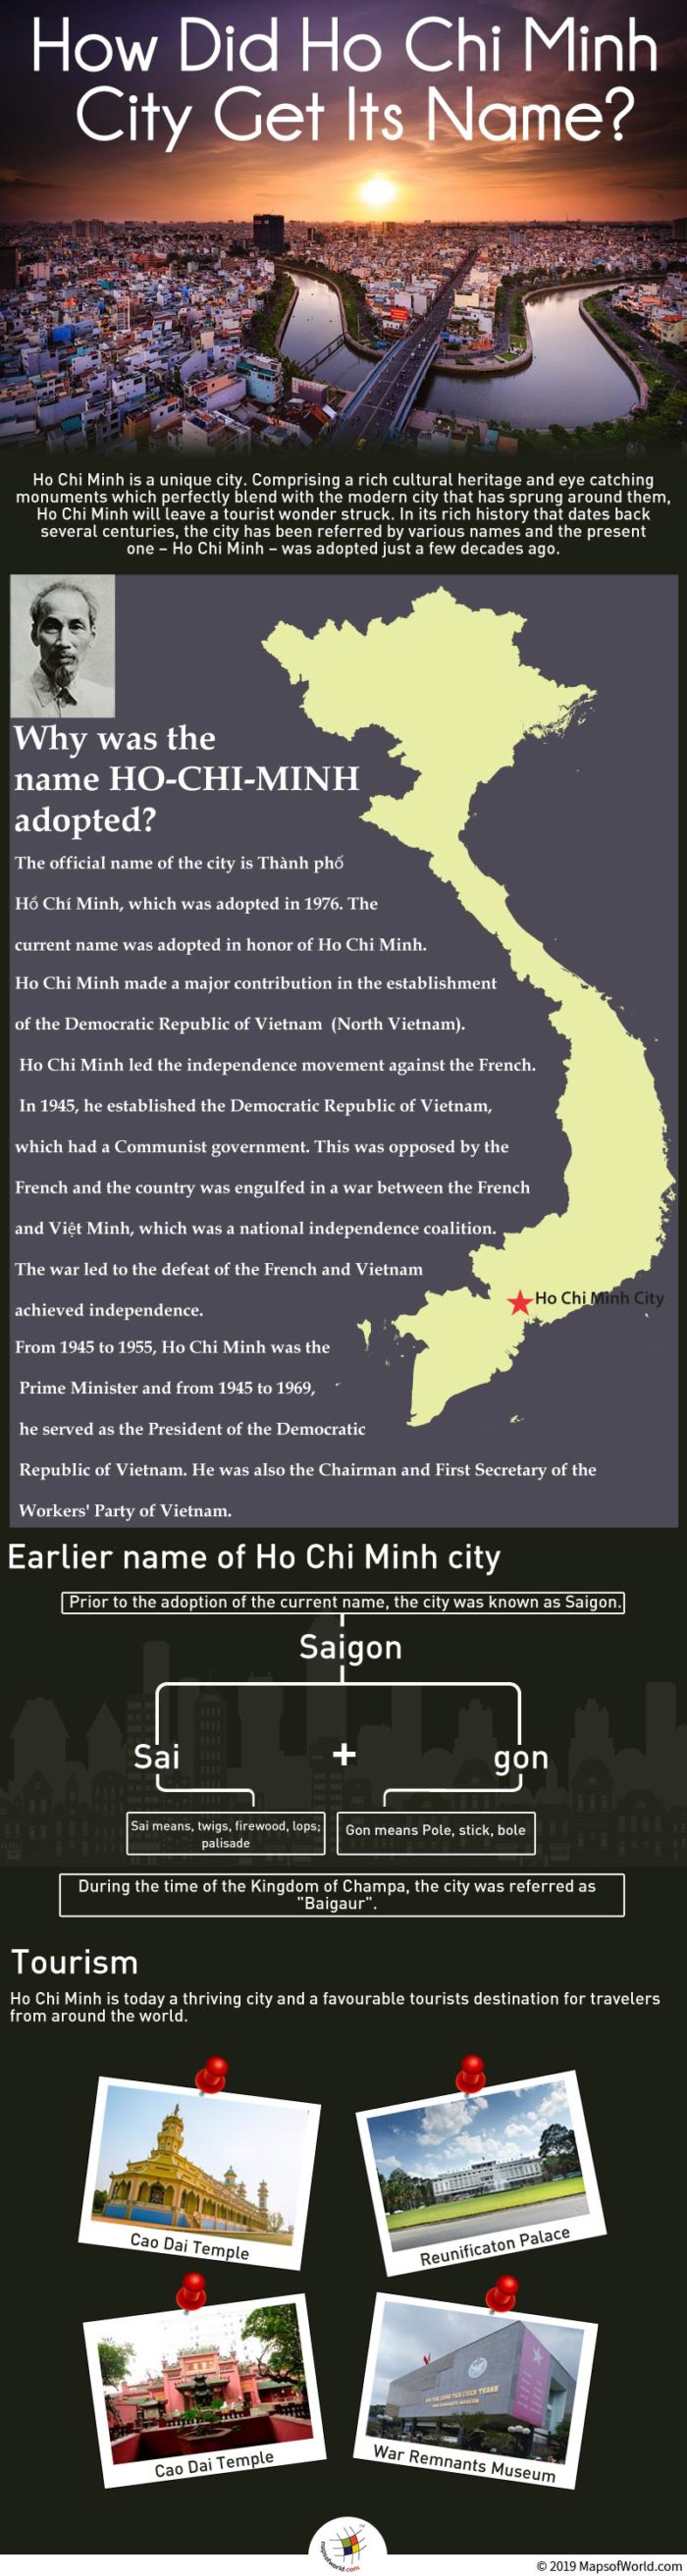 Infographic Giving Information on Ho Chi Minh City